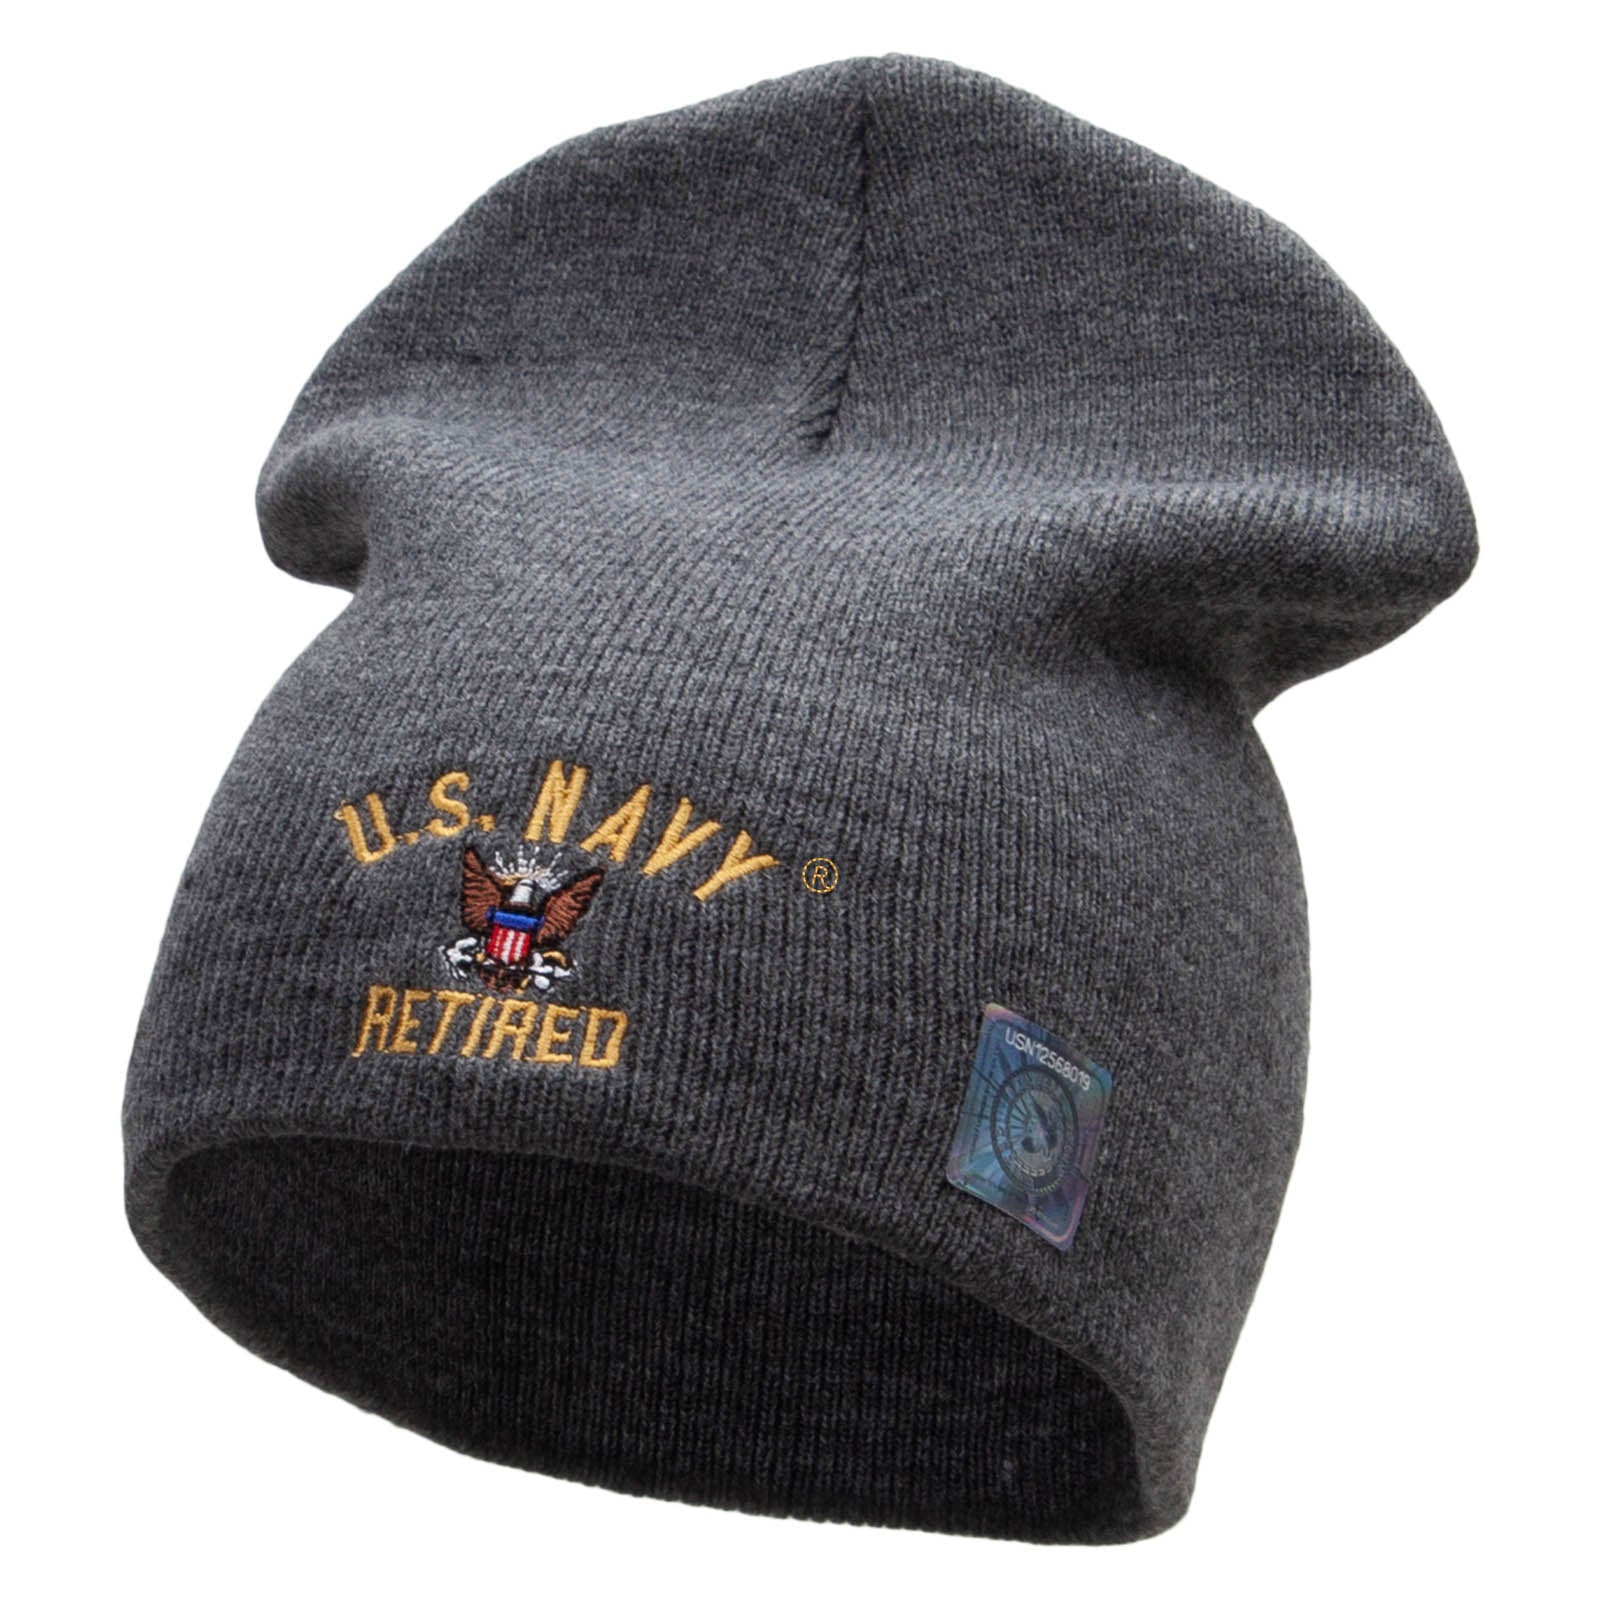 Licensed US Navy Retired Military Embroidered Short Beanie Made in USA - Charcoal OSFM